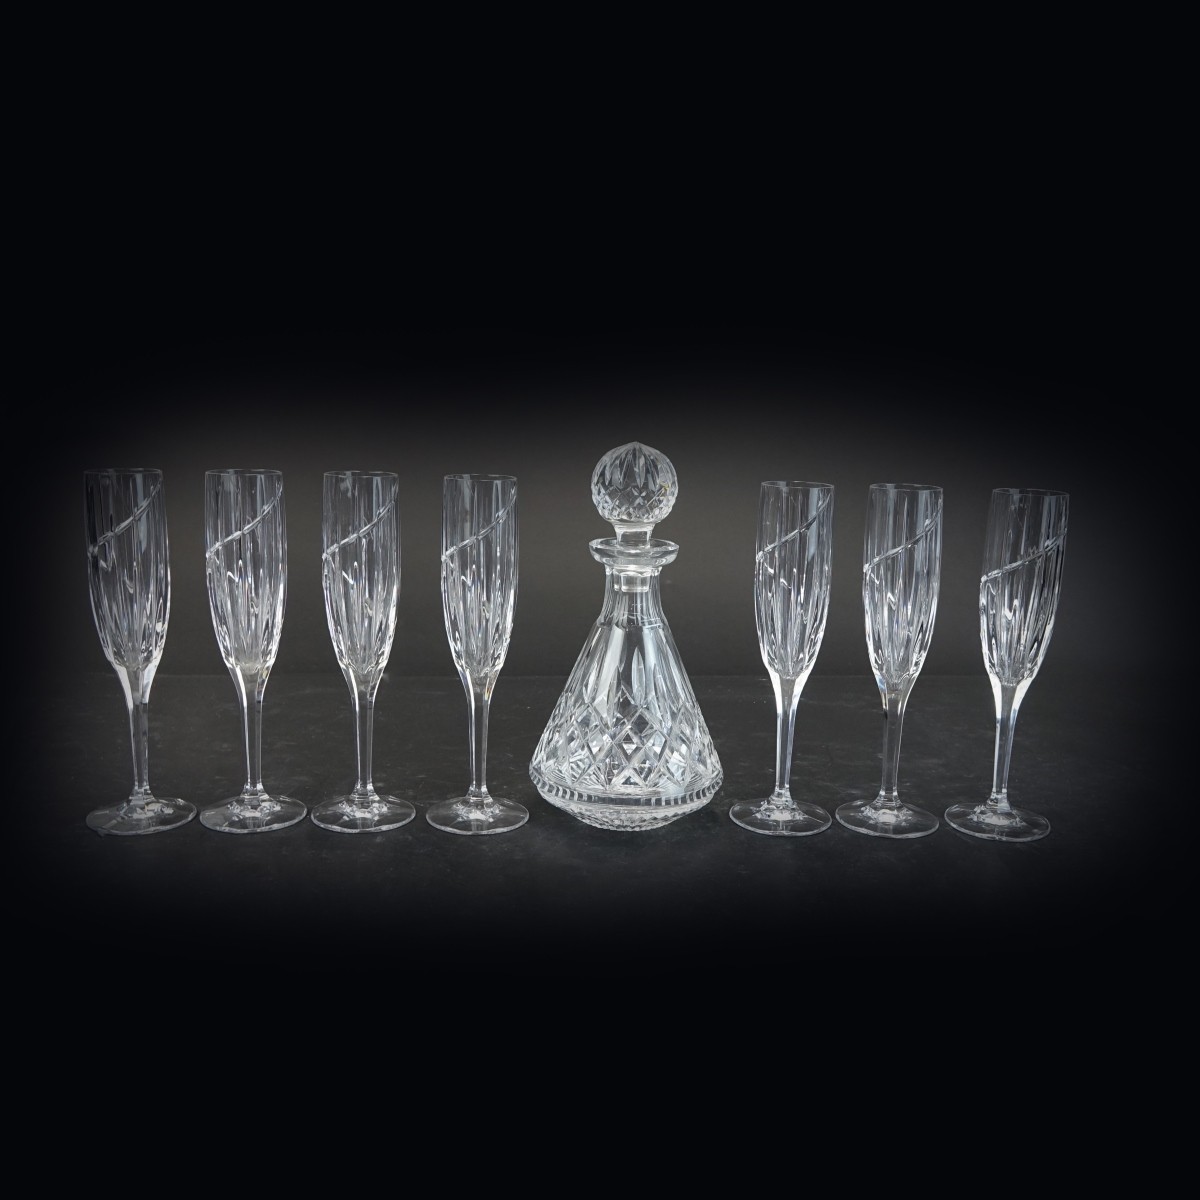 8 pcs Waterford Decanter with Champagne Glasses